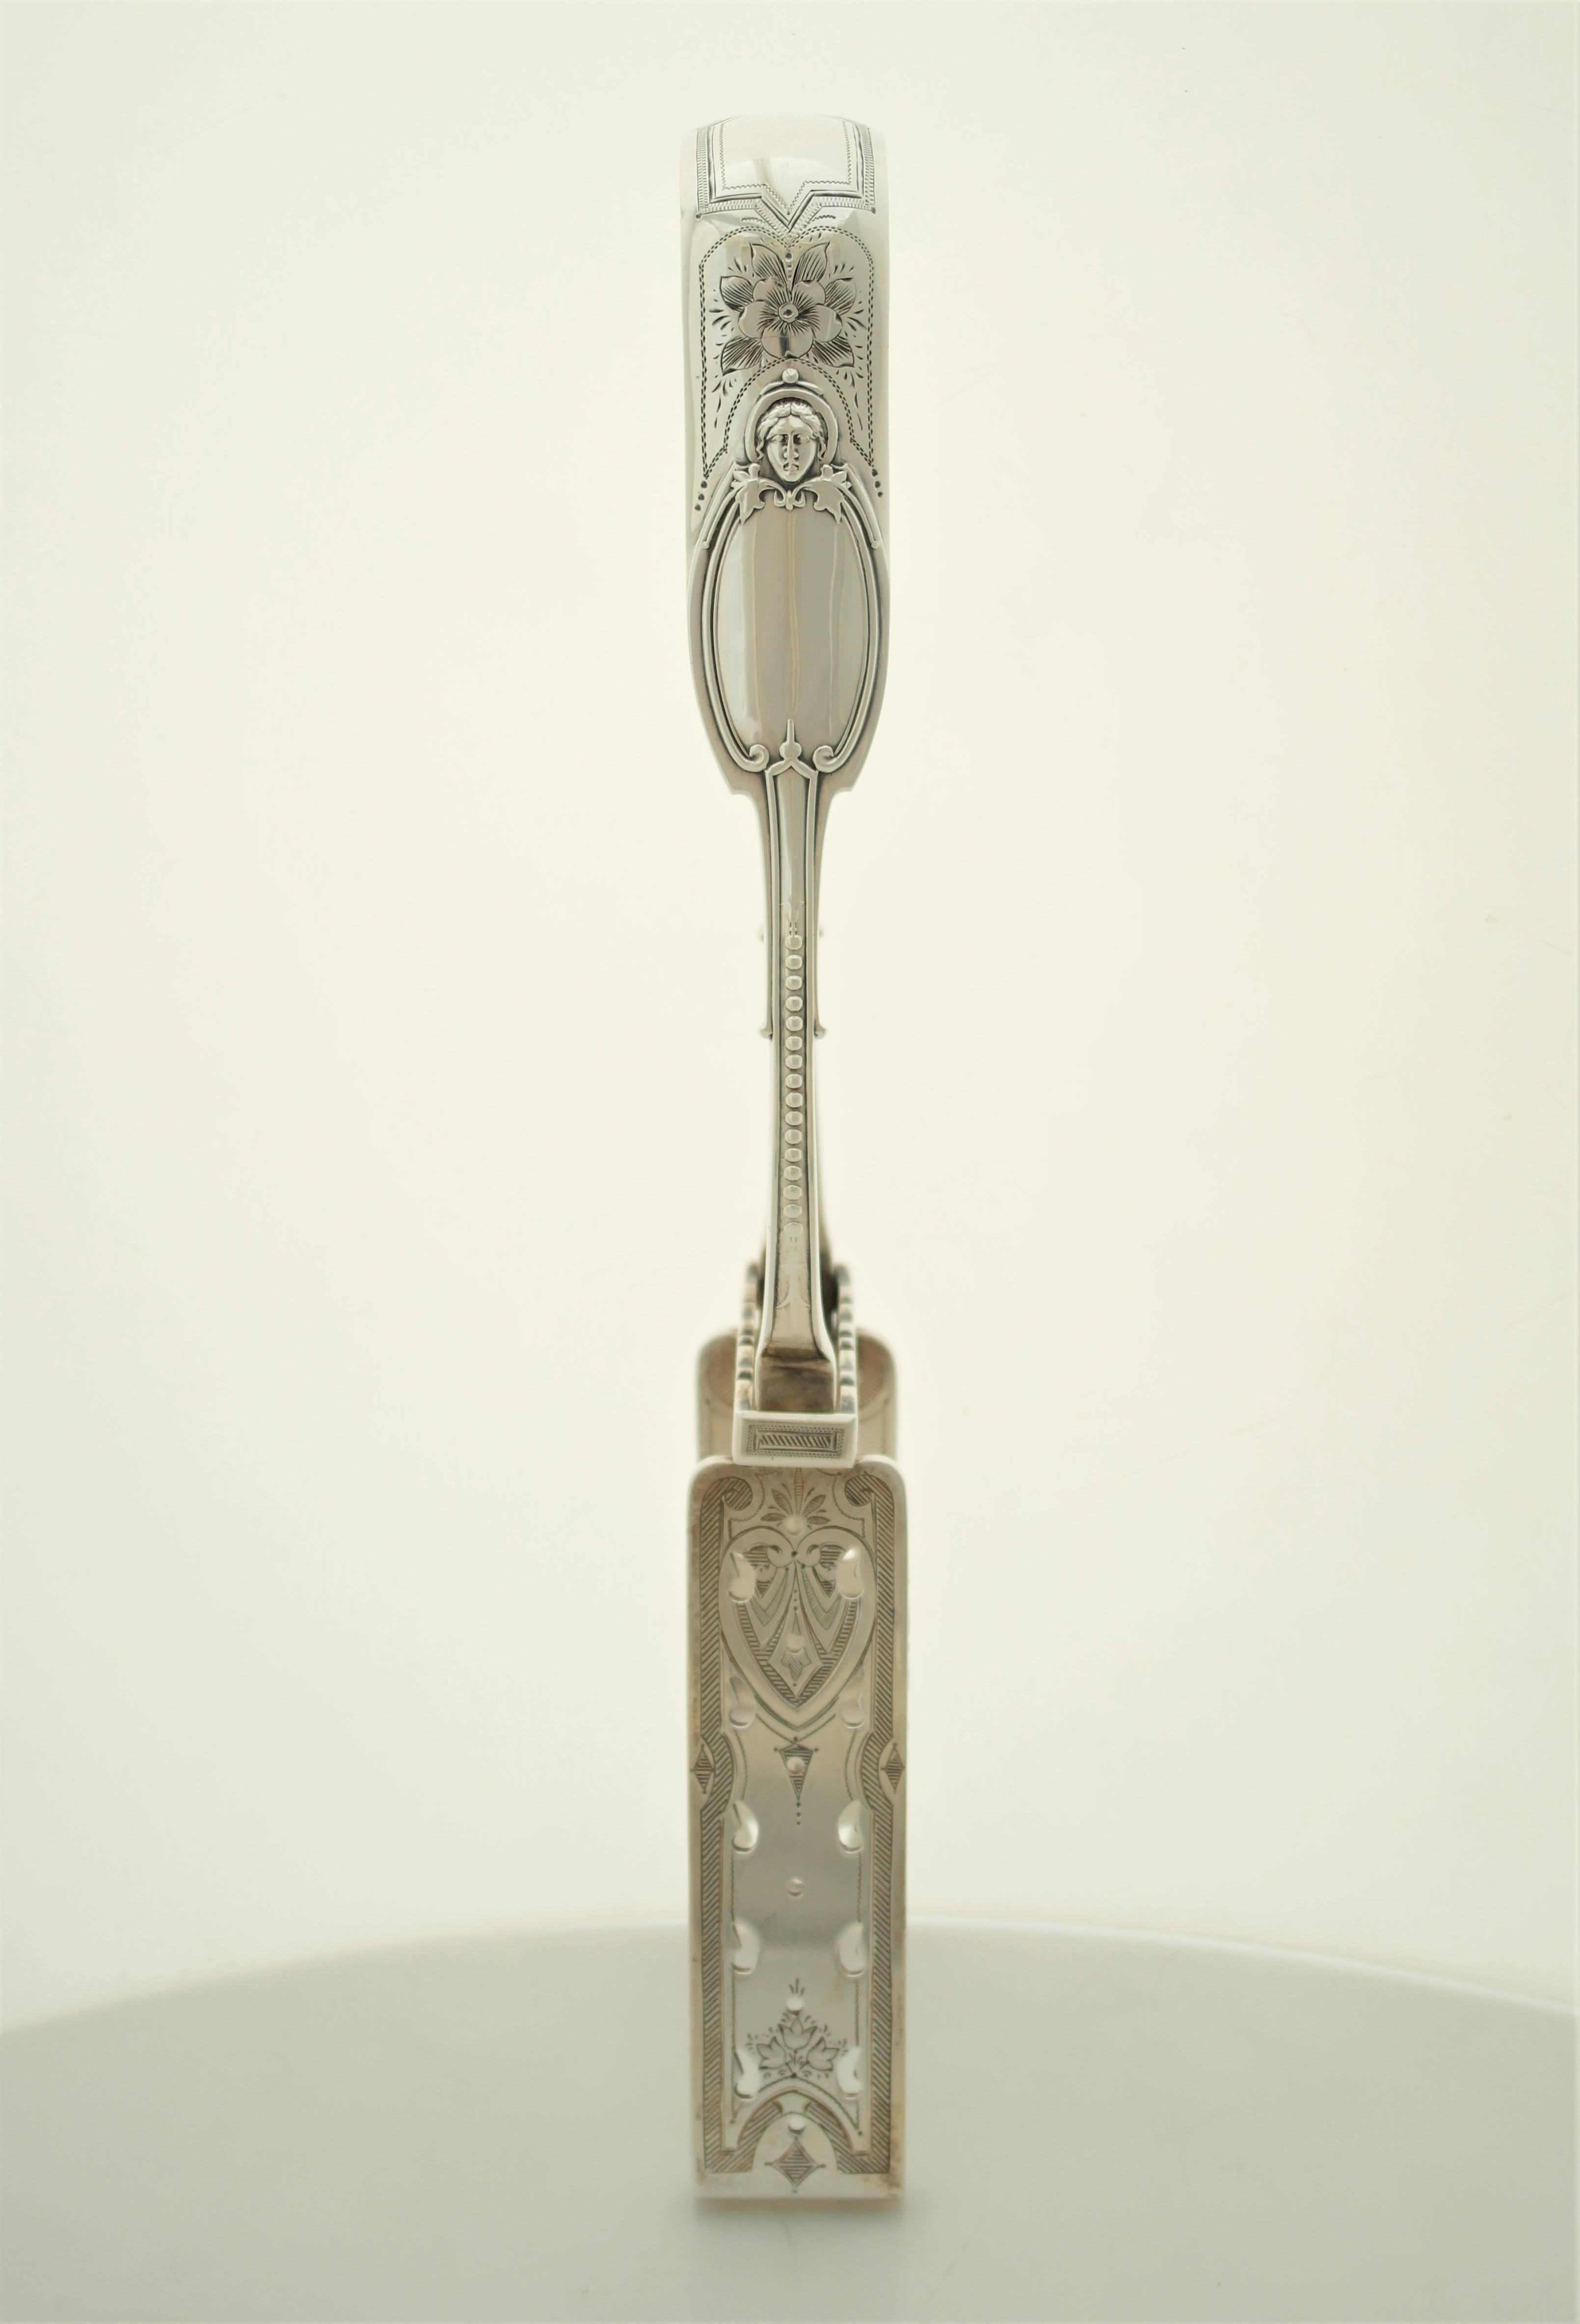 A coin silver Kenilworth pattern pair of asparagus tongs made by Albert Coles, circa 1850. Dimensions 11 inches long by 1 1/4 inches wide. In excellent condition.